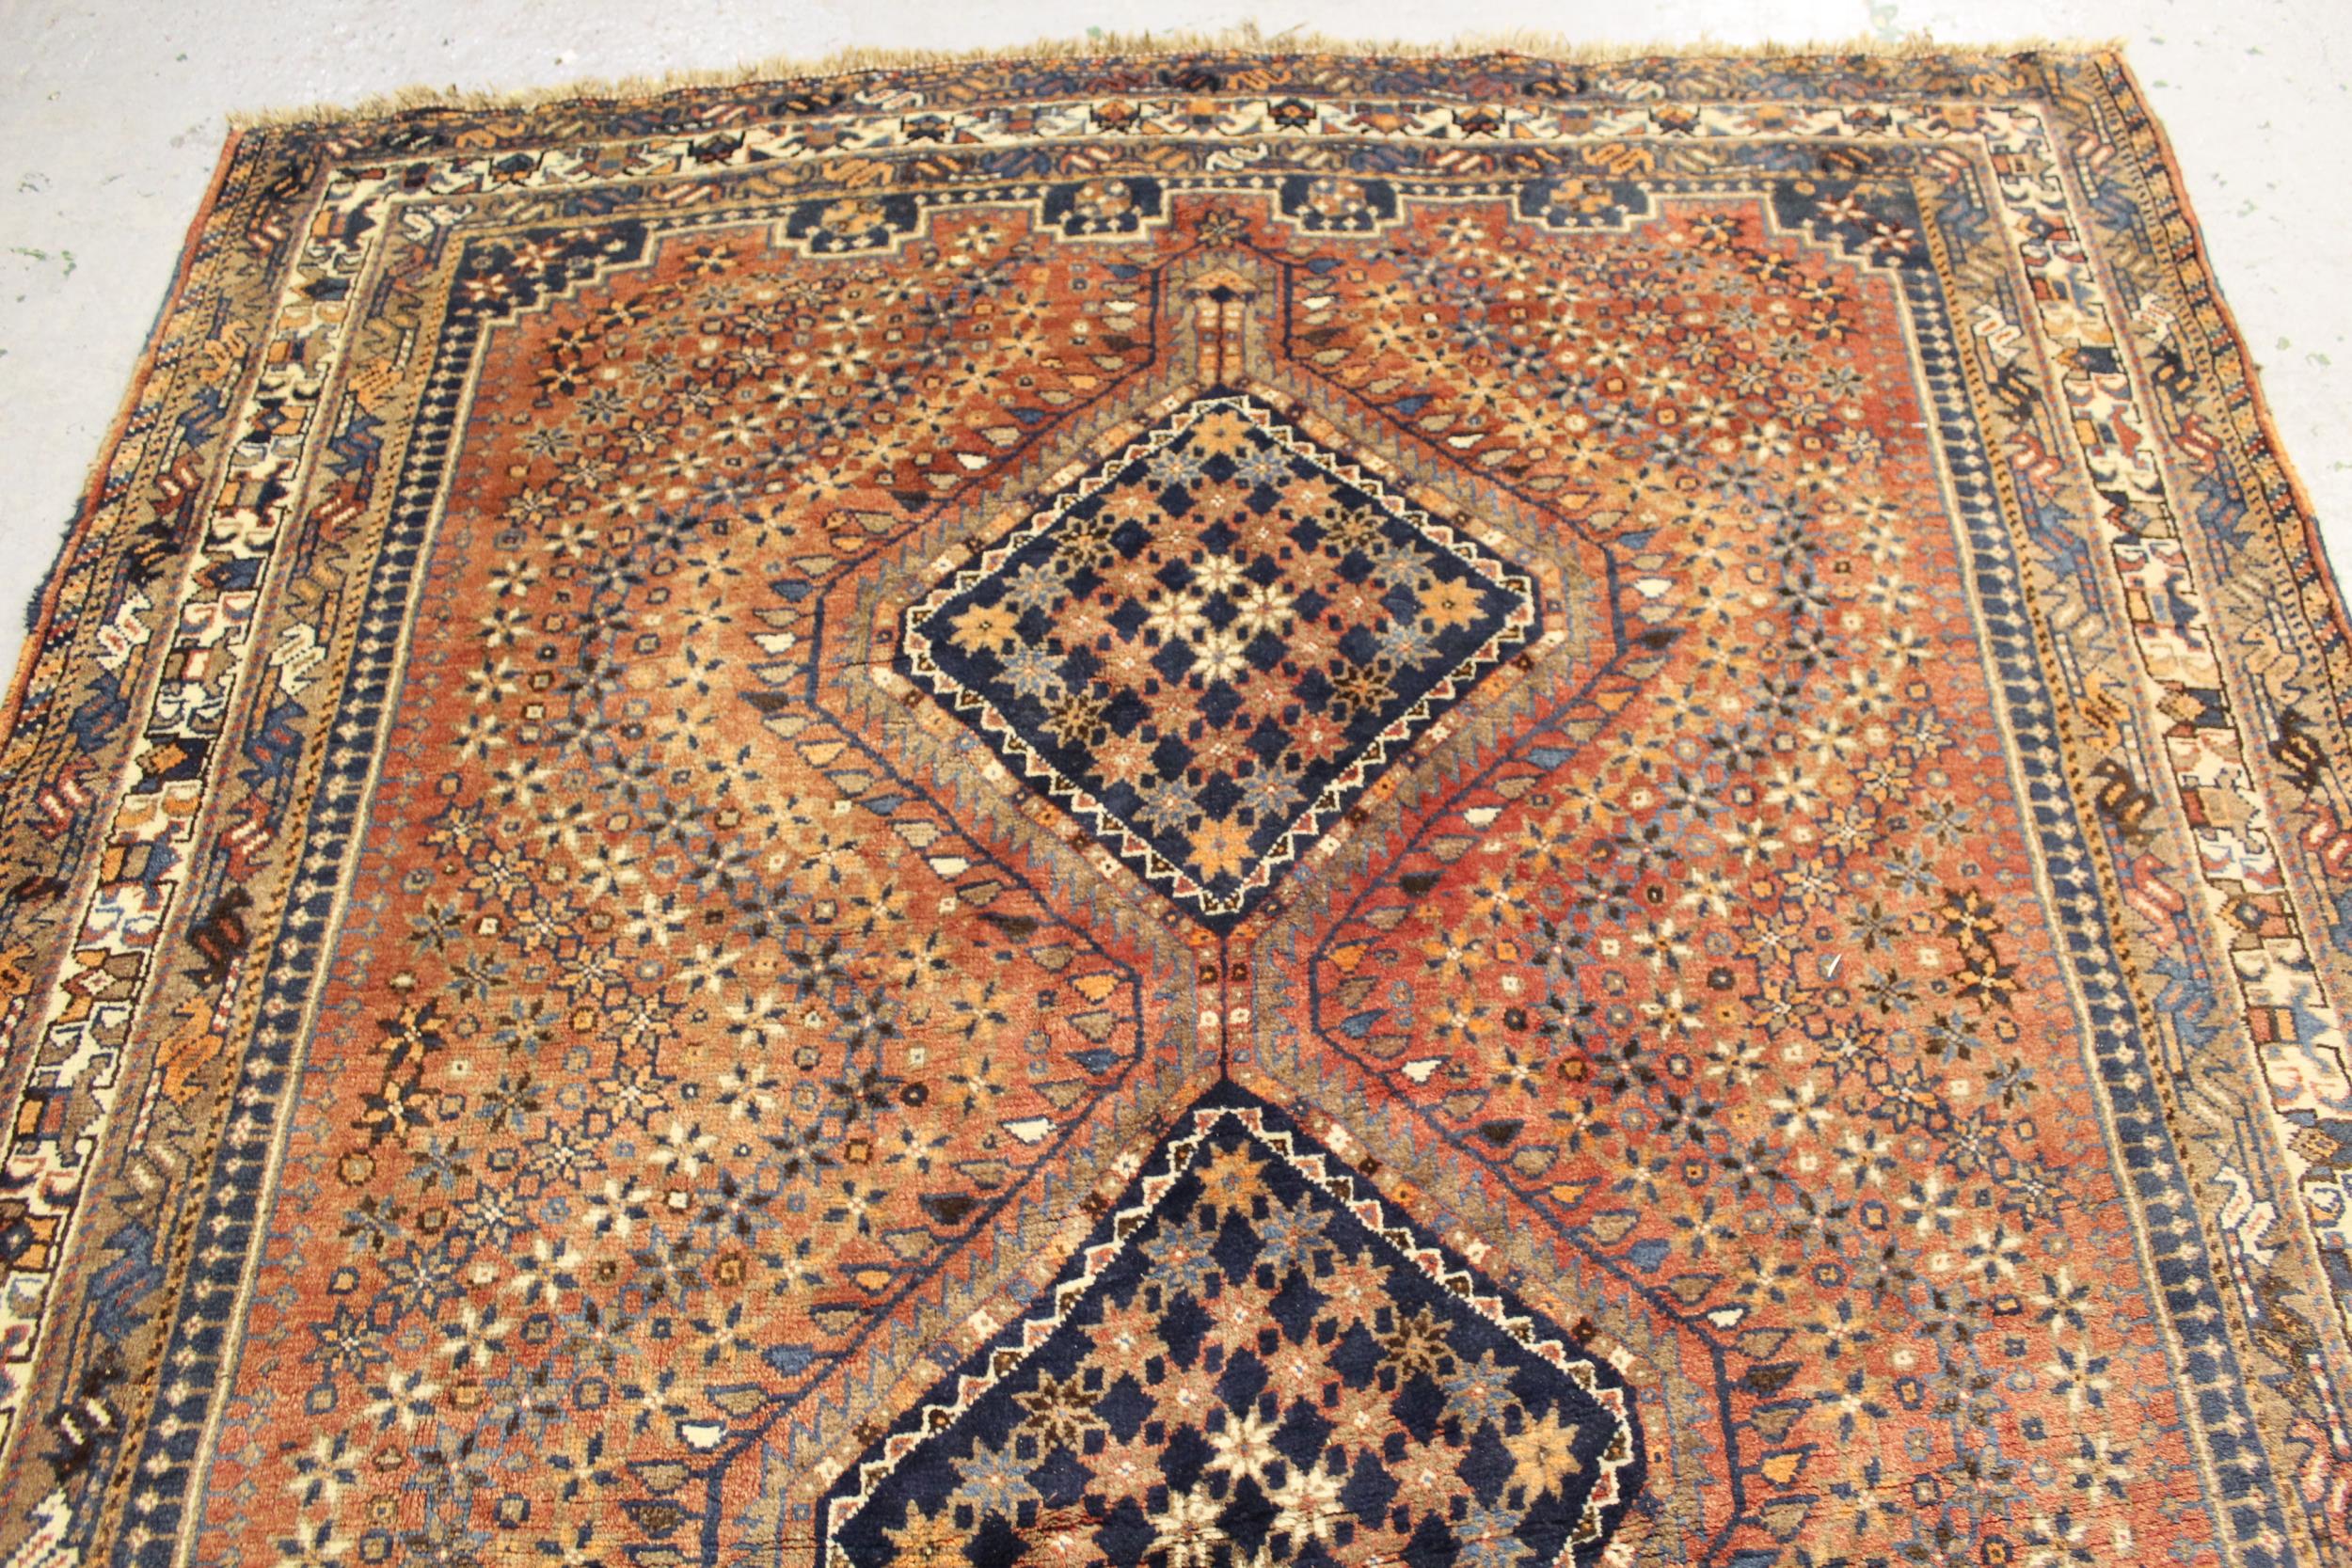 Small Shiraz carpet with a triple pole medallion design on a red ground with borders, 10ft - Image 2 of 4